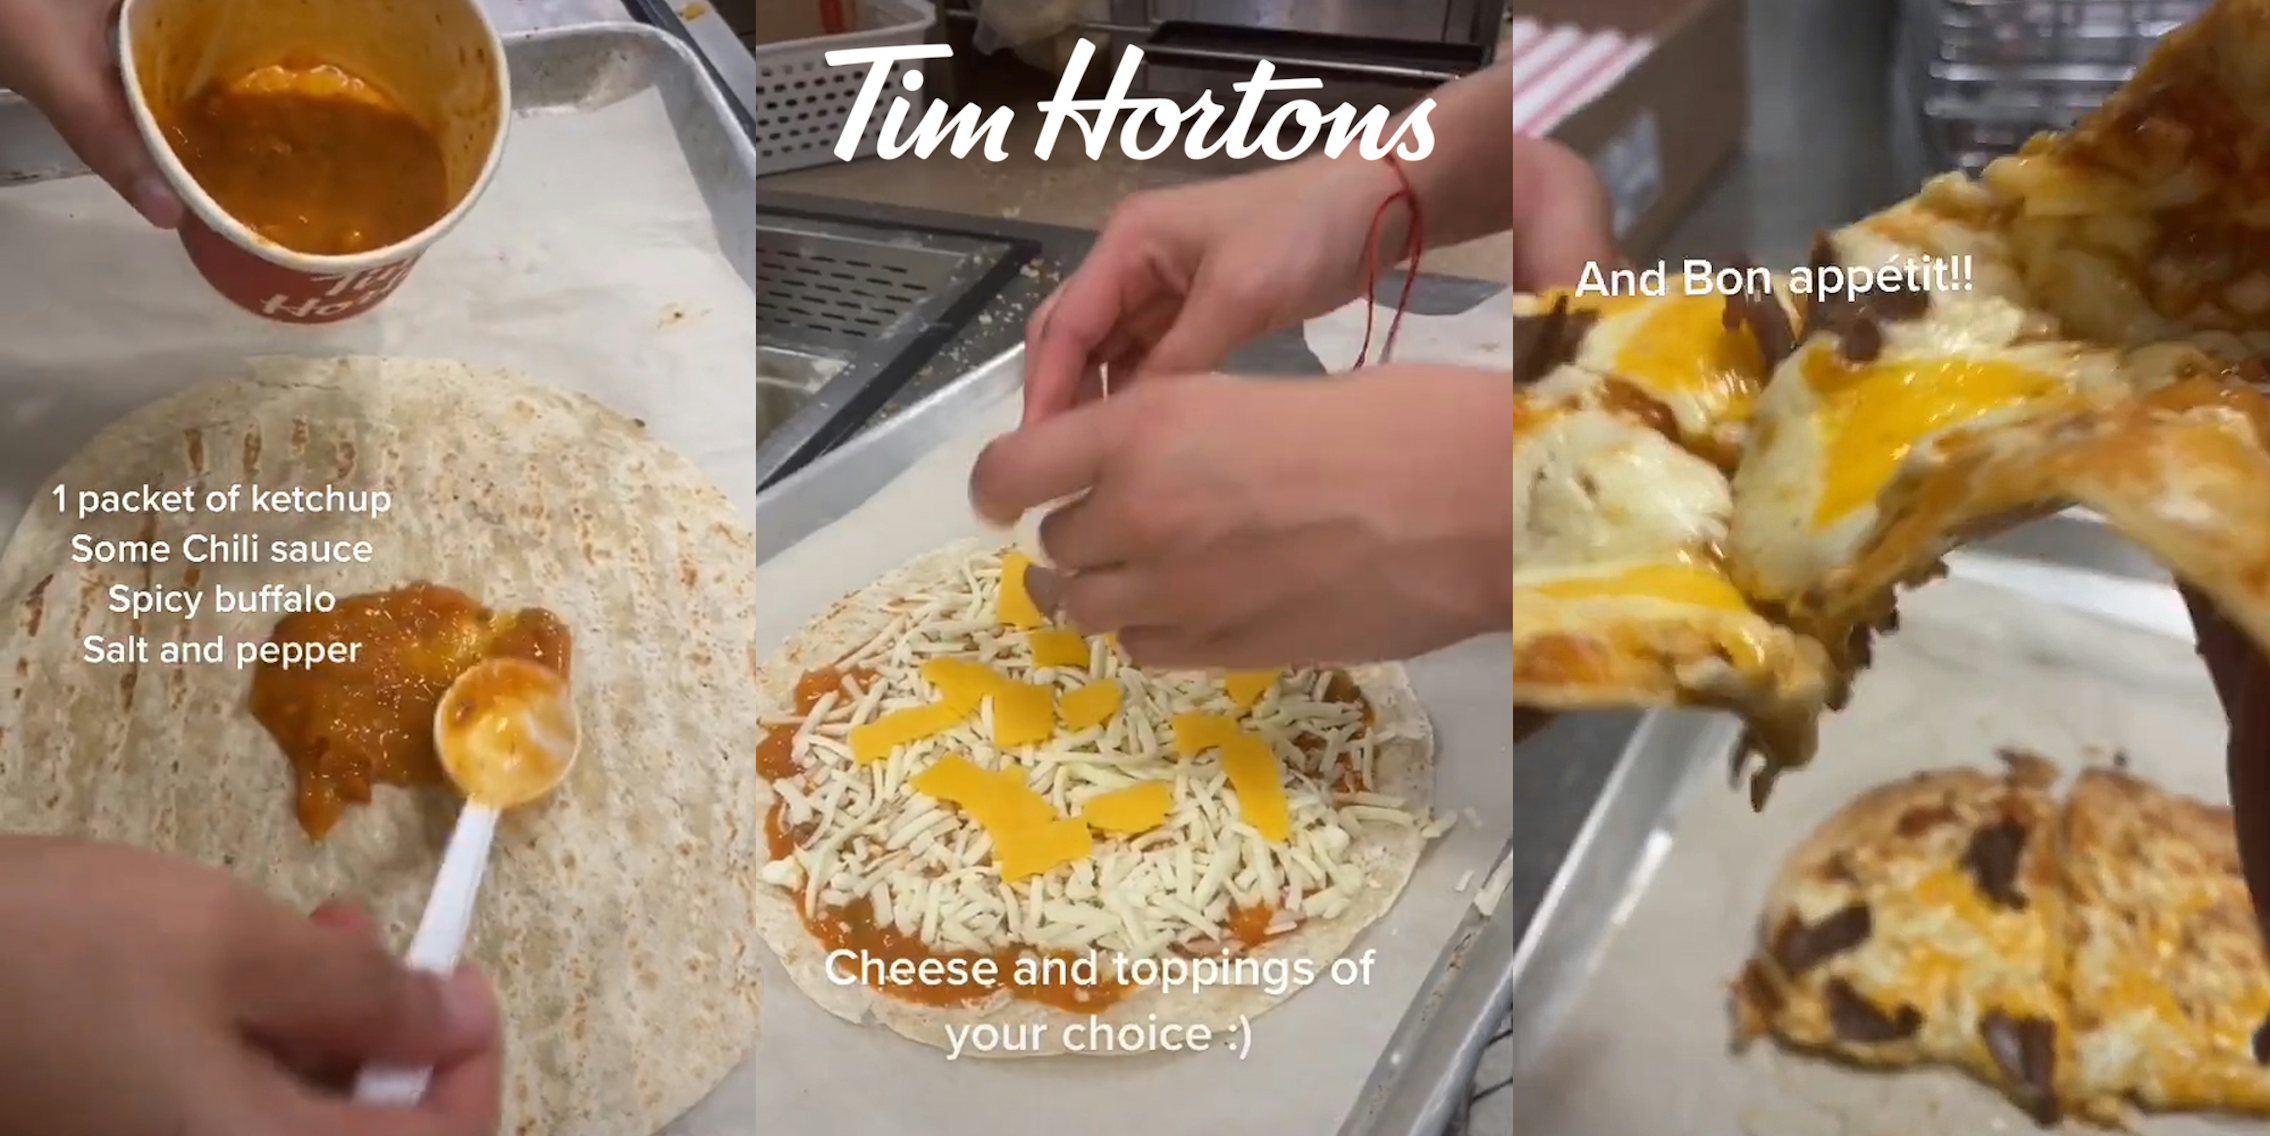 Tim Hortons puts burgers on the menu for the first time, but they